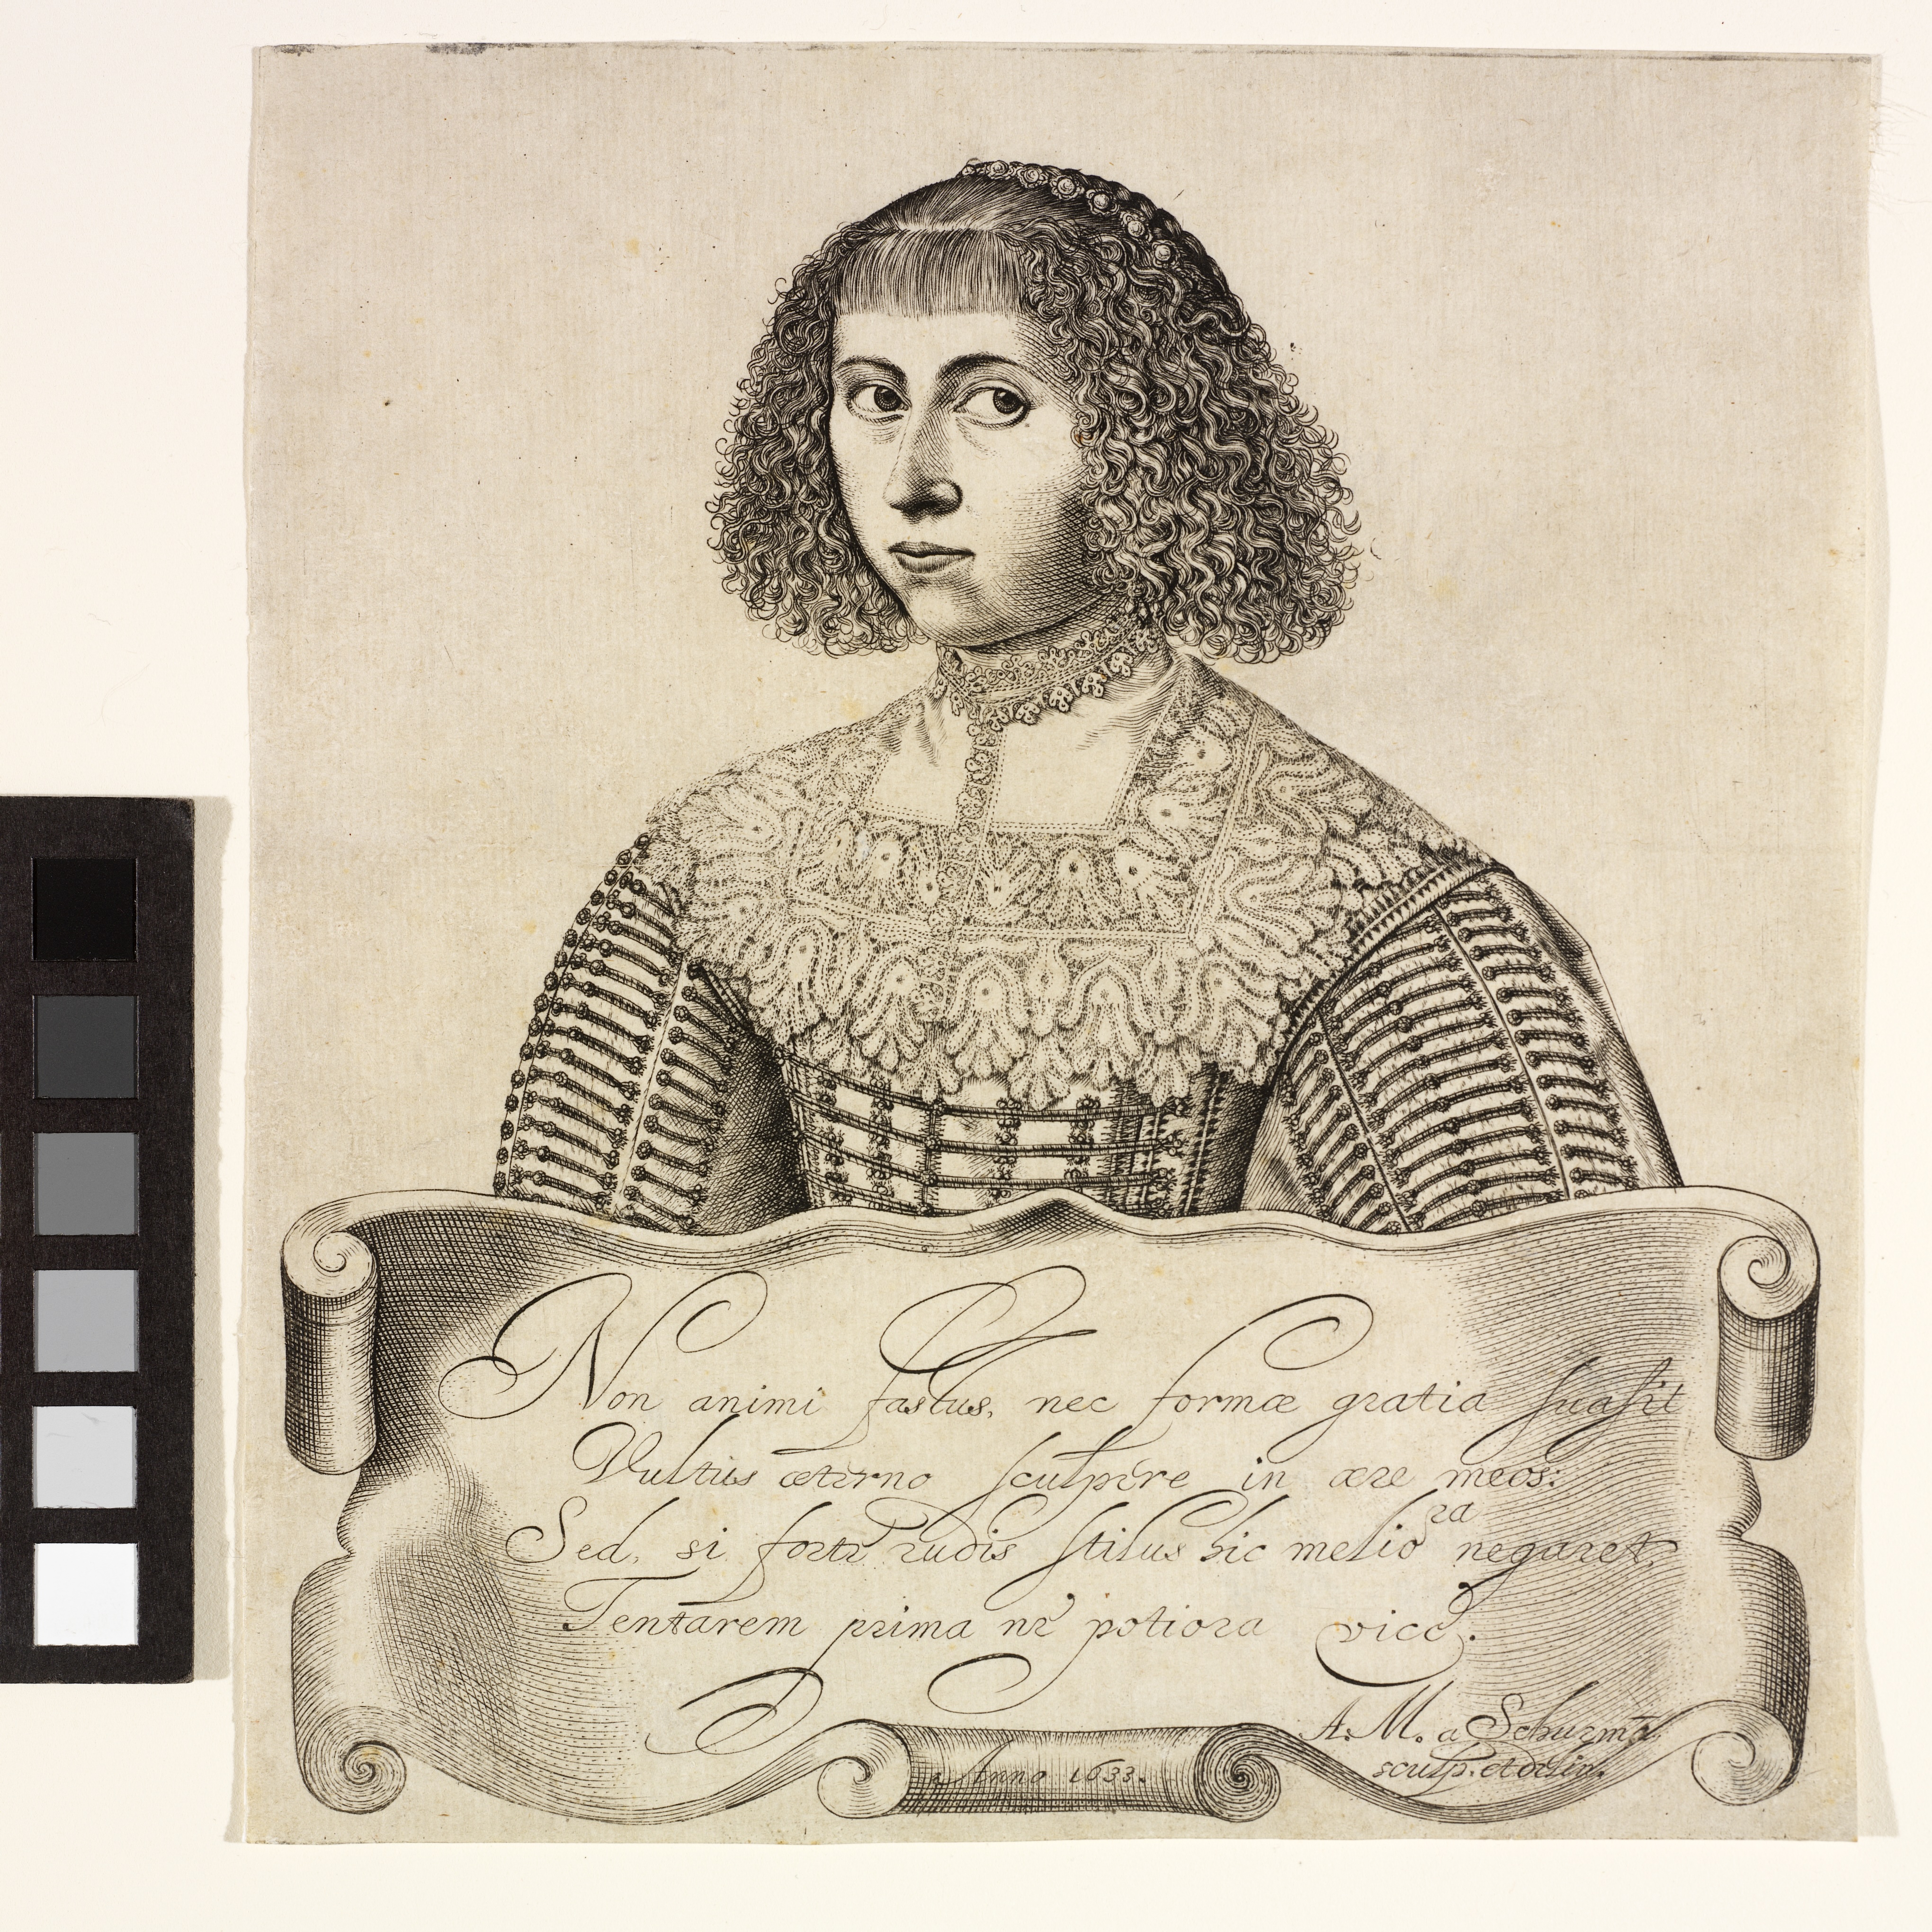 A bust-length, printed self-portrait of the artist wearing an elaborate dress with a lace collar. She wears her curly hair cut short in a bob with bangs. She looks at the viewer directly with a sidewards glance and a slight smile. Below her there is a scroll with an inscription.